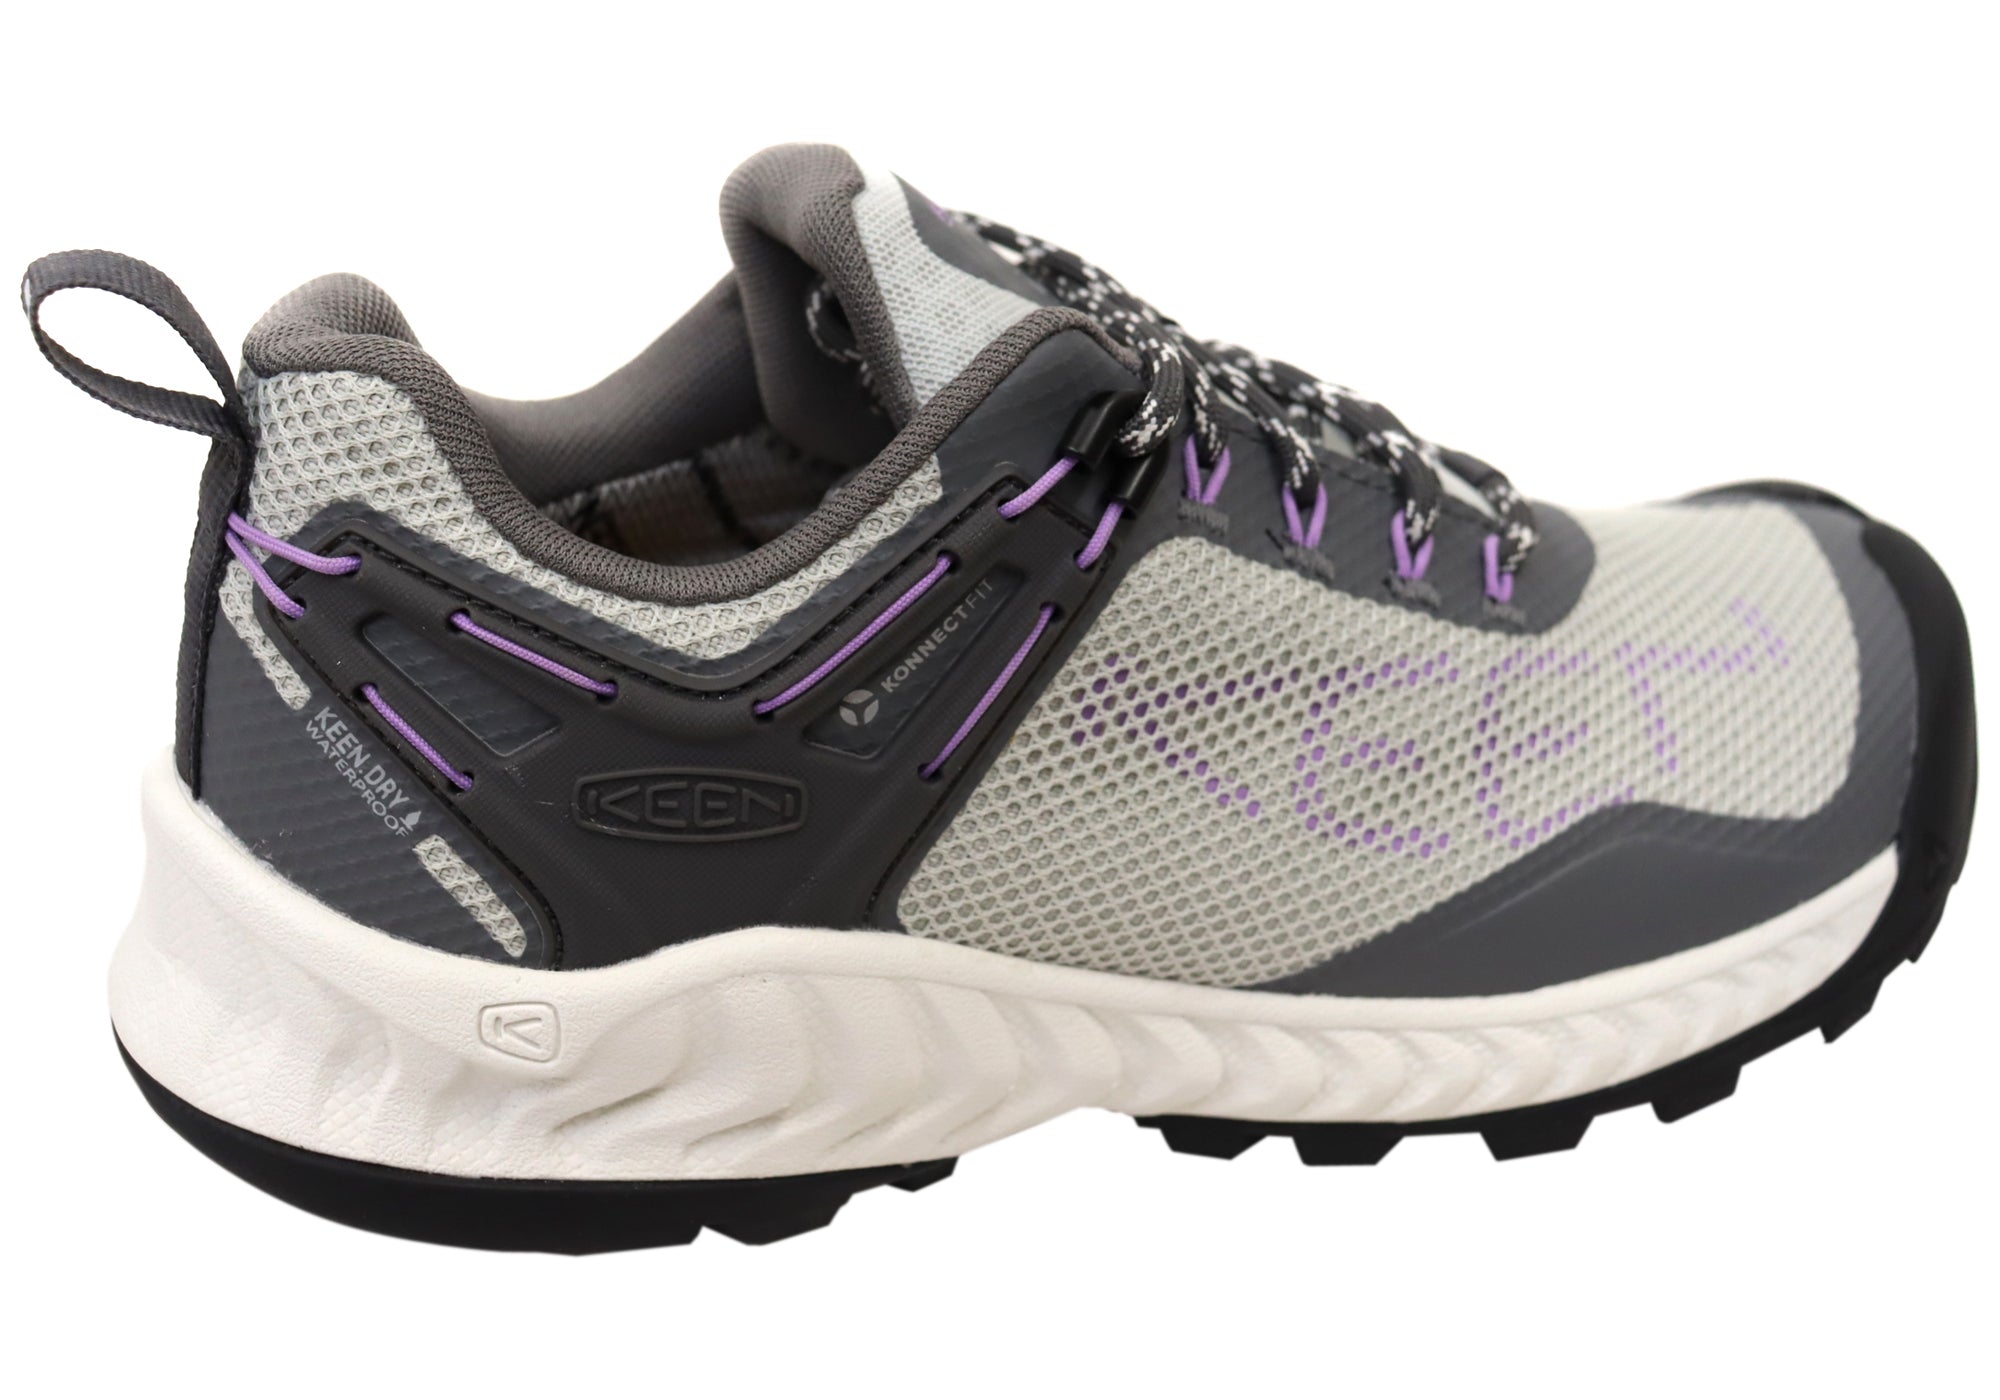 Keen Womens Comfortable Lace Up NXIS EVO Waterproof Shoes